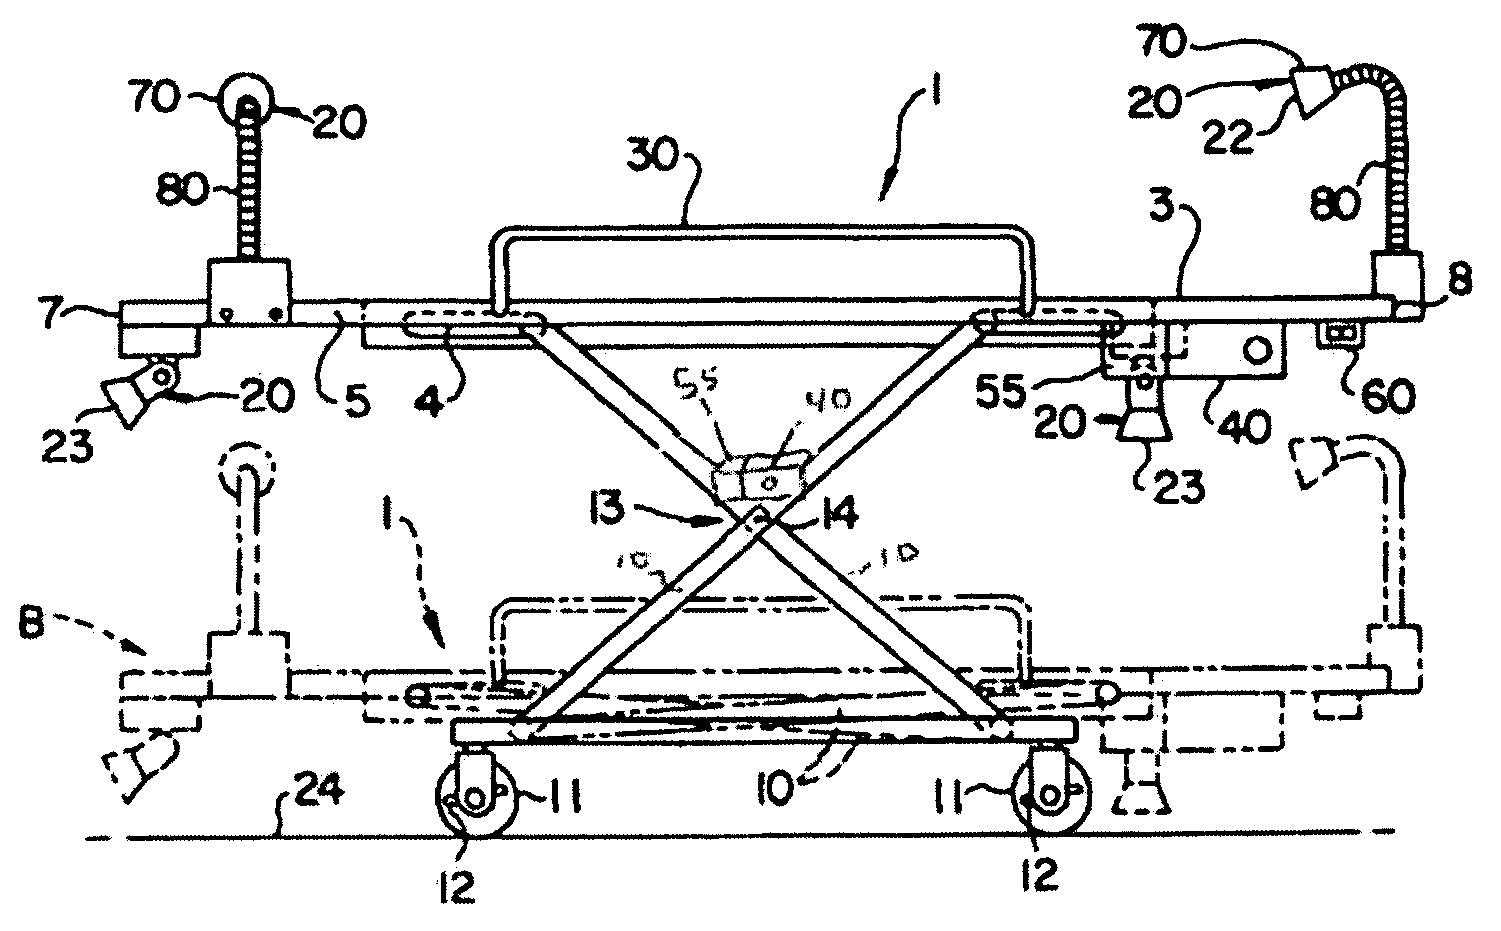 Medical transport safety apparatus with lighting system